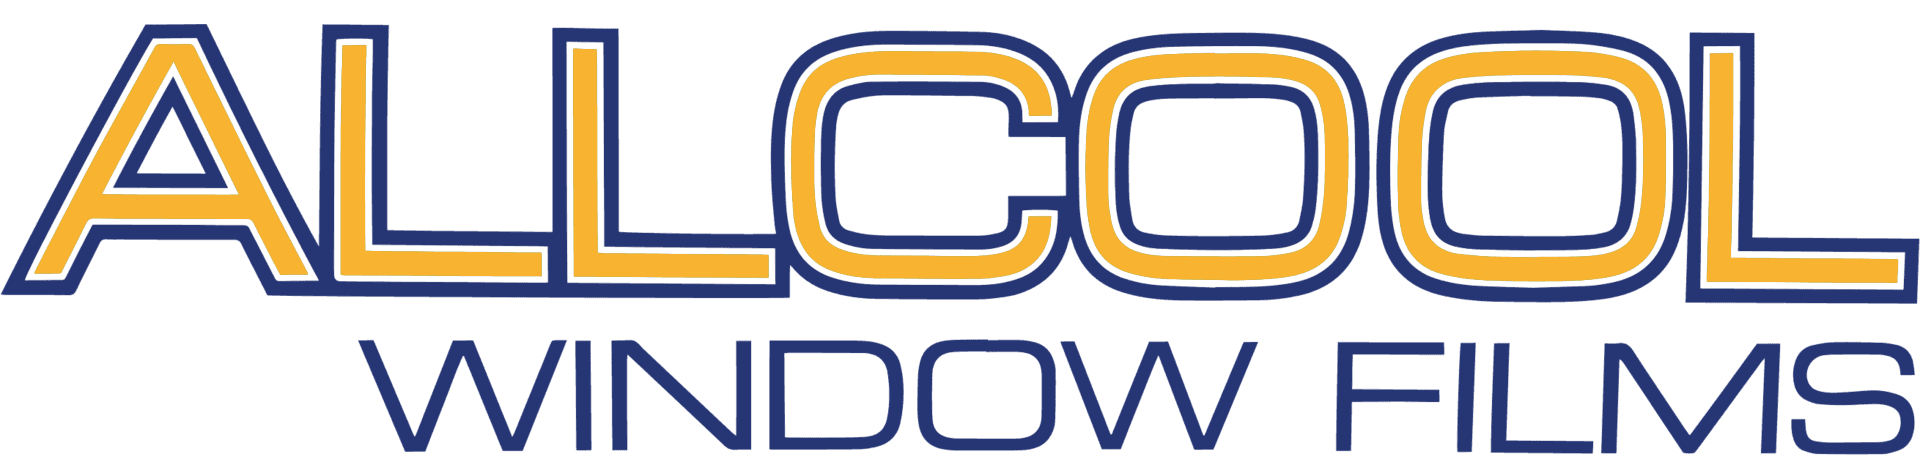 commercial and residential glass window tinting allcool window films perth